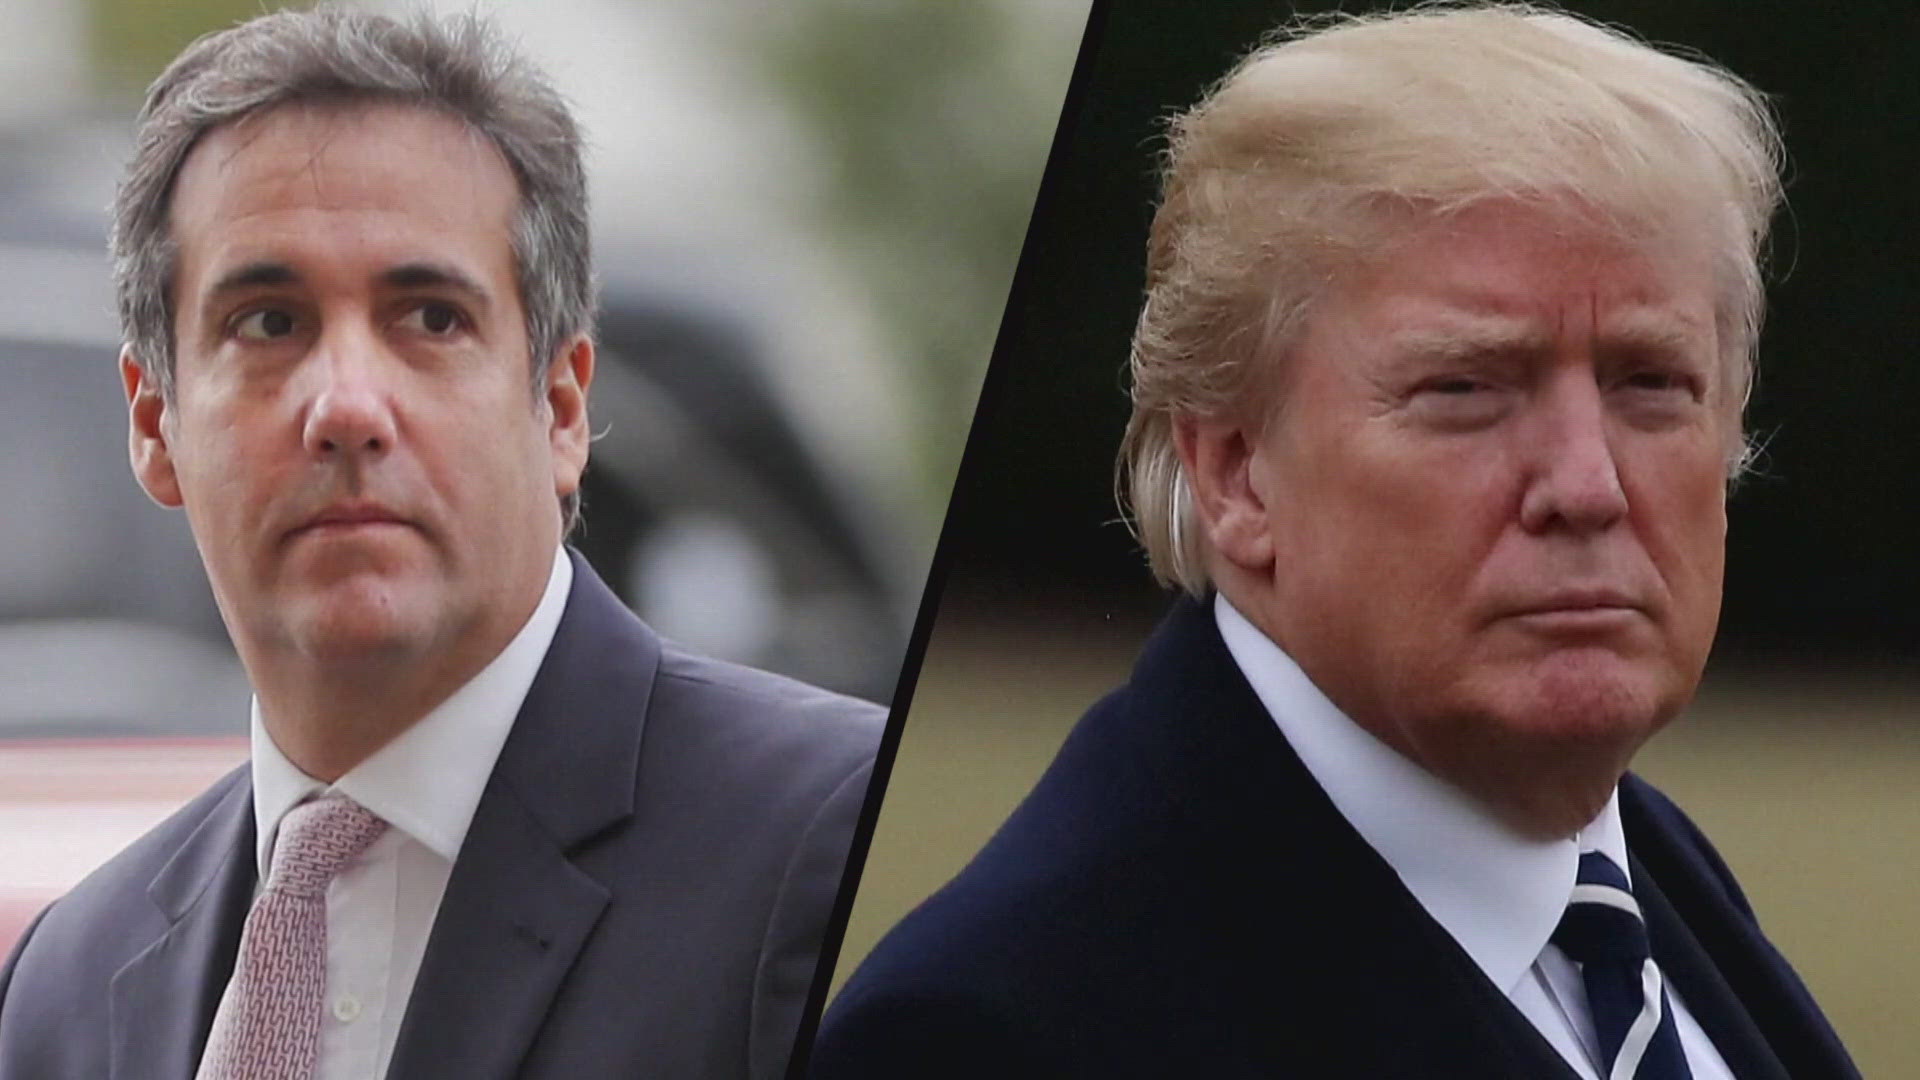 The former President's legal team has attacked Cohen's credibility and argues he's out for revenge.